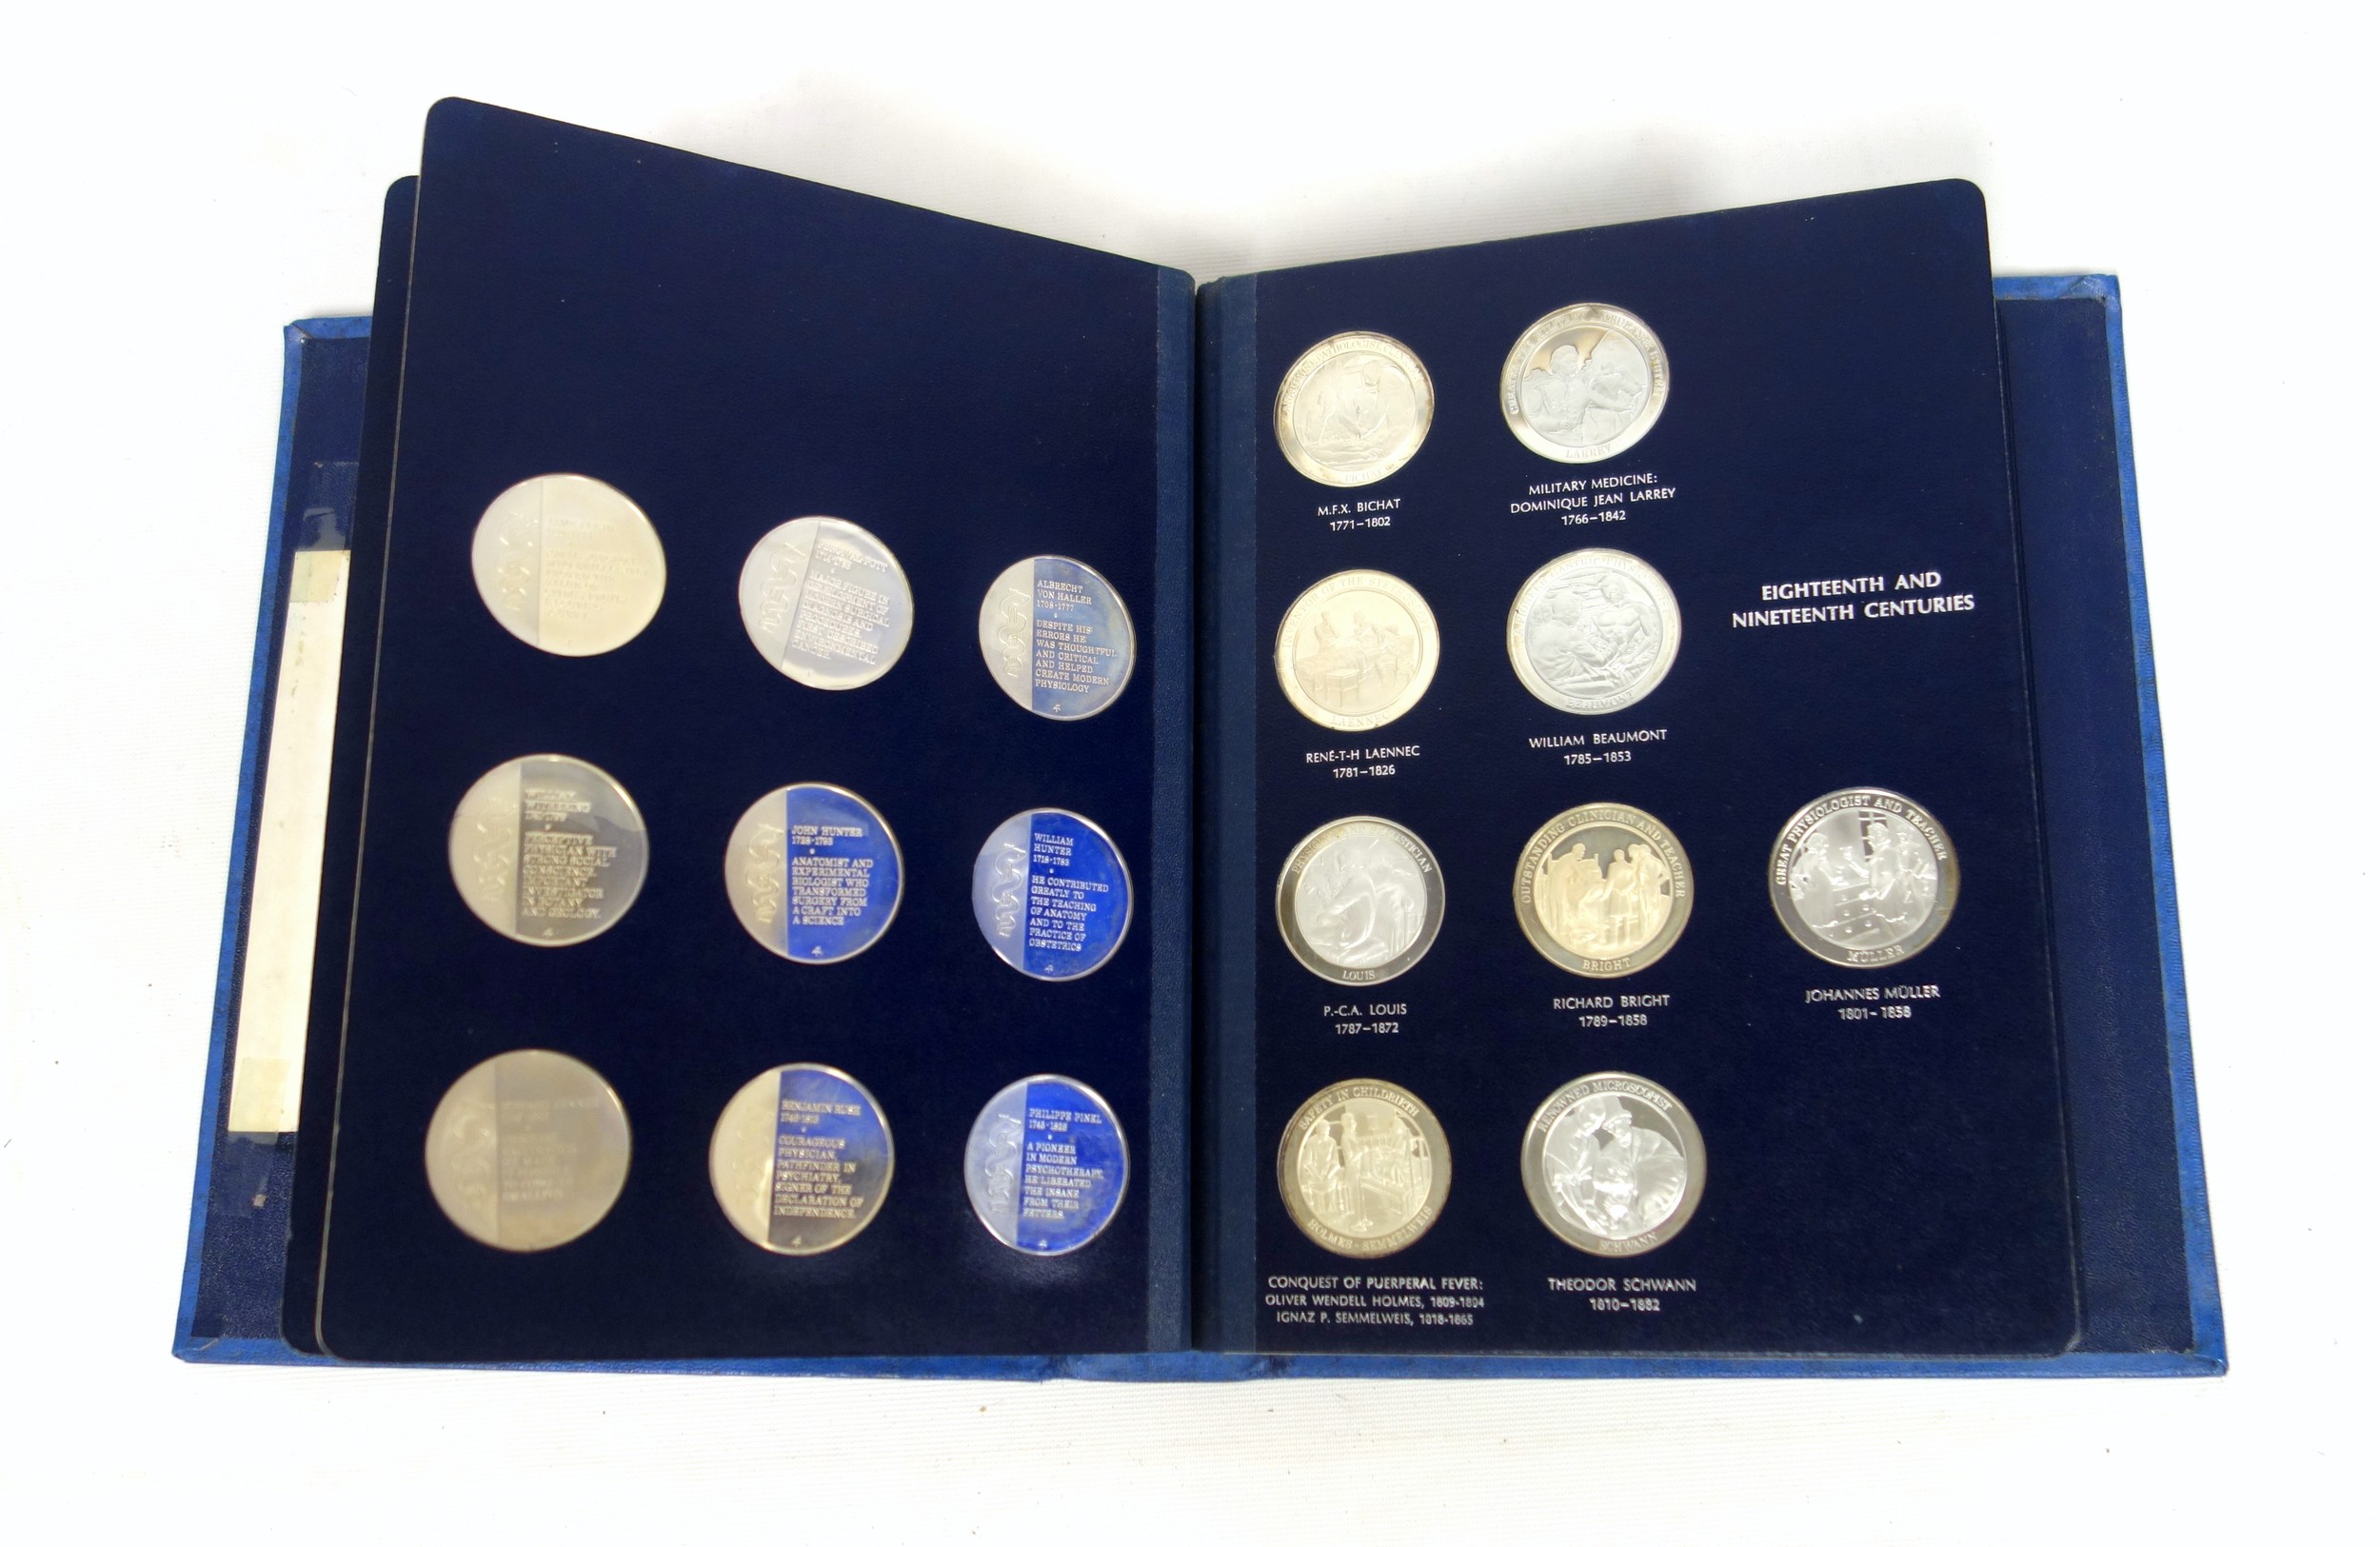 Systema Sciences Ltd. set of 66 Medallic History of Medicine silver special mint finish medals, - Image 7 of 11